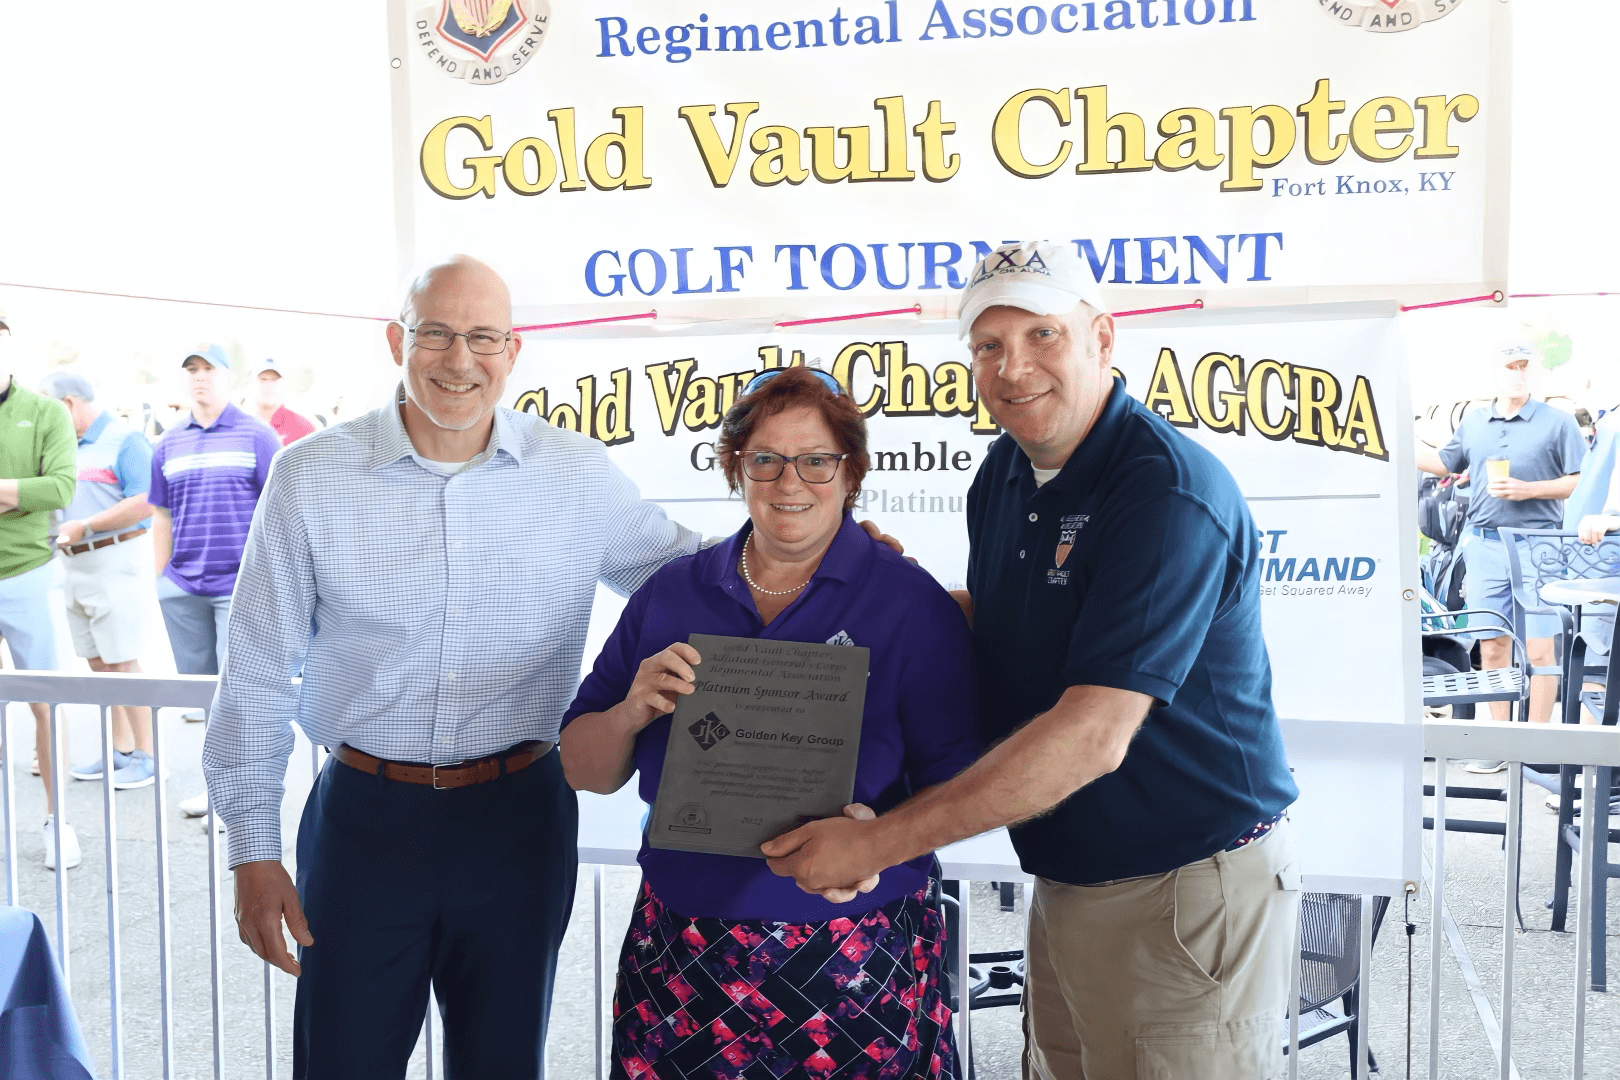 Three people pose with a certificate at the Human Capital Management chapter golf tournament in Fort Knox, KY, with banners and logos in the background.